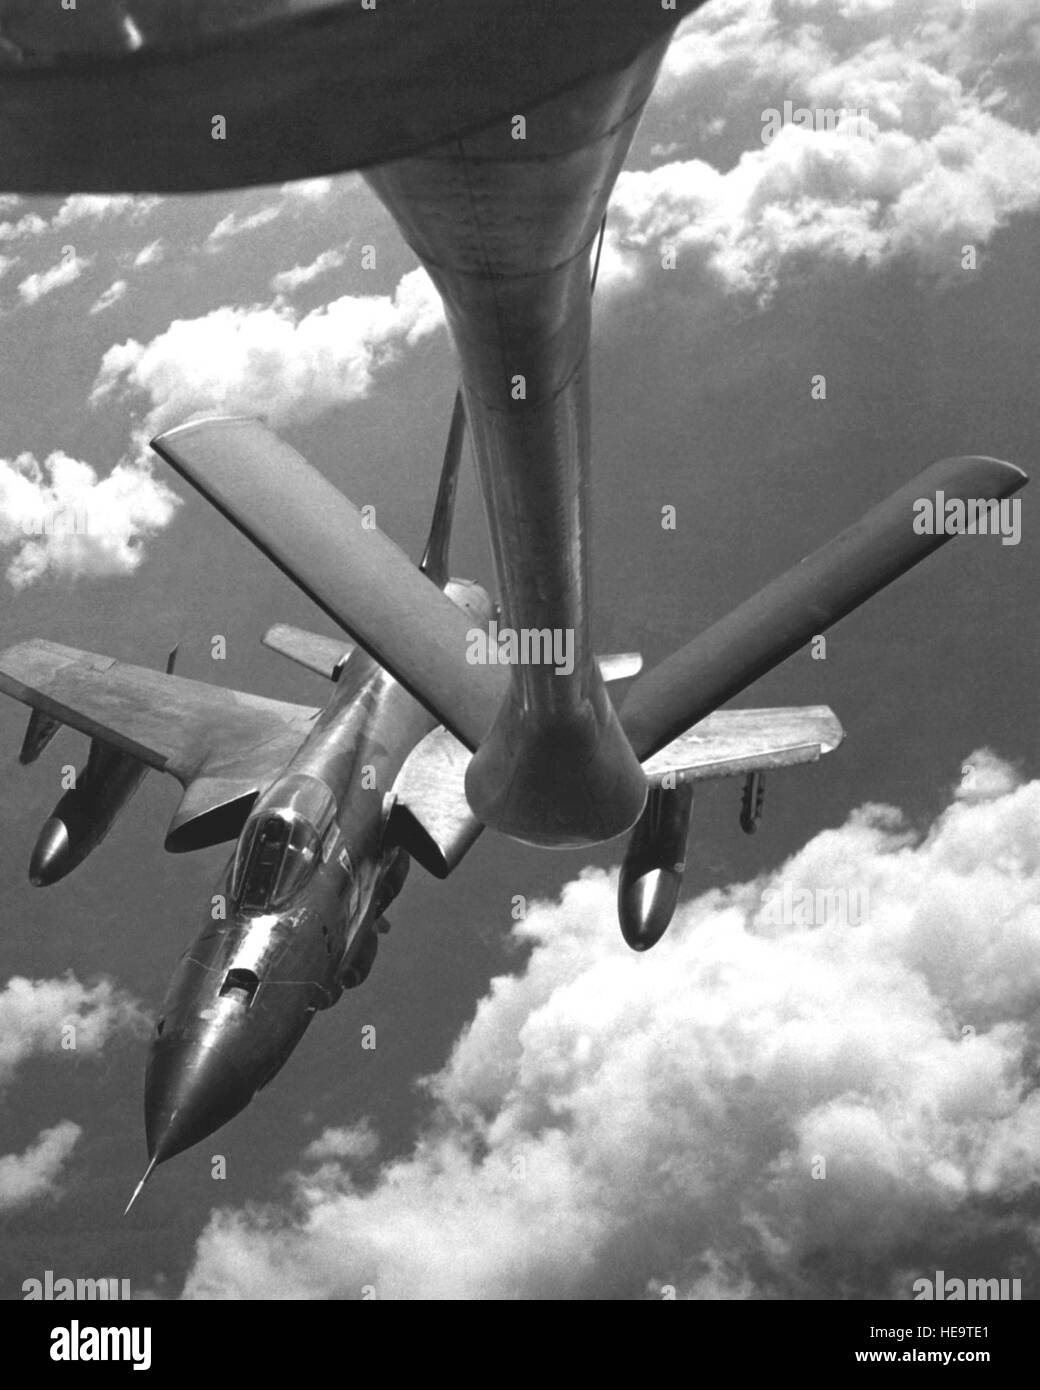 An air-to-air front view of an F-105D Thunderchief aircraft approaching a KC-135 Stratotanker aircraft for refueling during flight.  Aerial refueling and forward air control crews were honored by 388th Tactical Fighter Wing F-105D Thunderchief aircraft pilots in recognition of their successful coordinated combat mission.  The day of the combat was called 'Tanks a Million-That's a FAC' day. Stock Photo